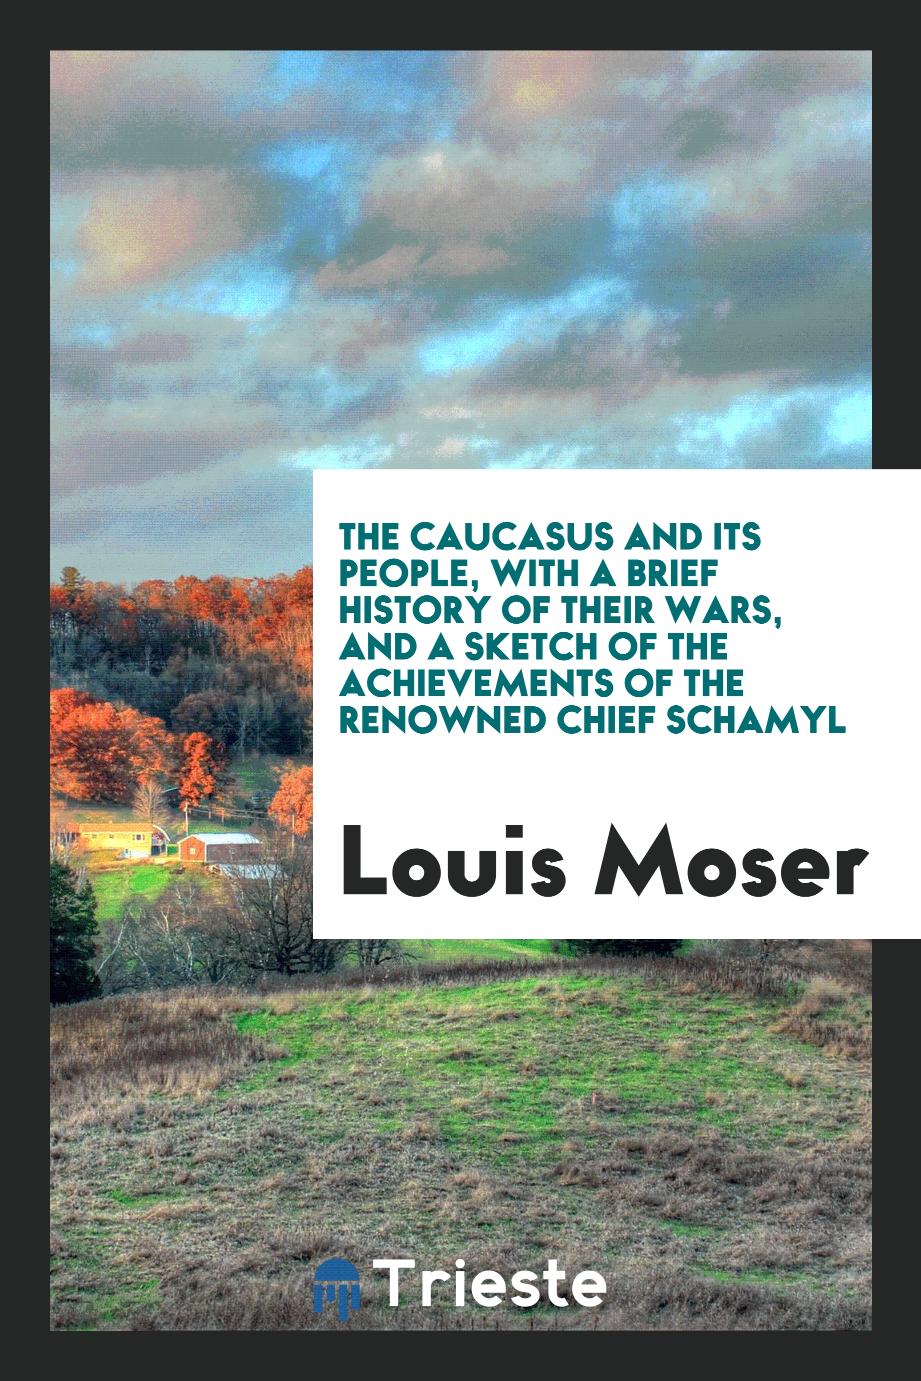 Louis Moser - The Caucasus and Its People, with a Brief History of Their Wars, and a Sketch of the Achievements of the Renowned Chief Schamyl